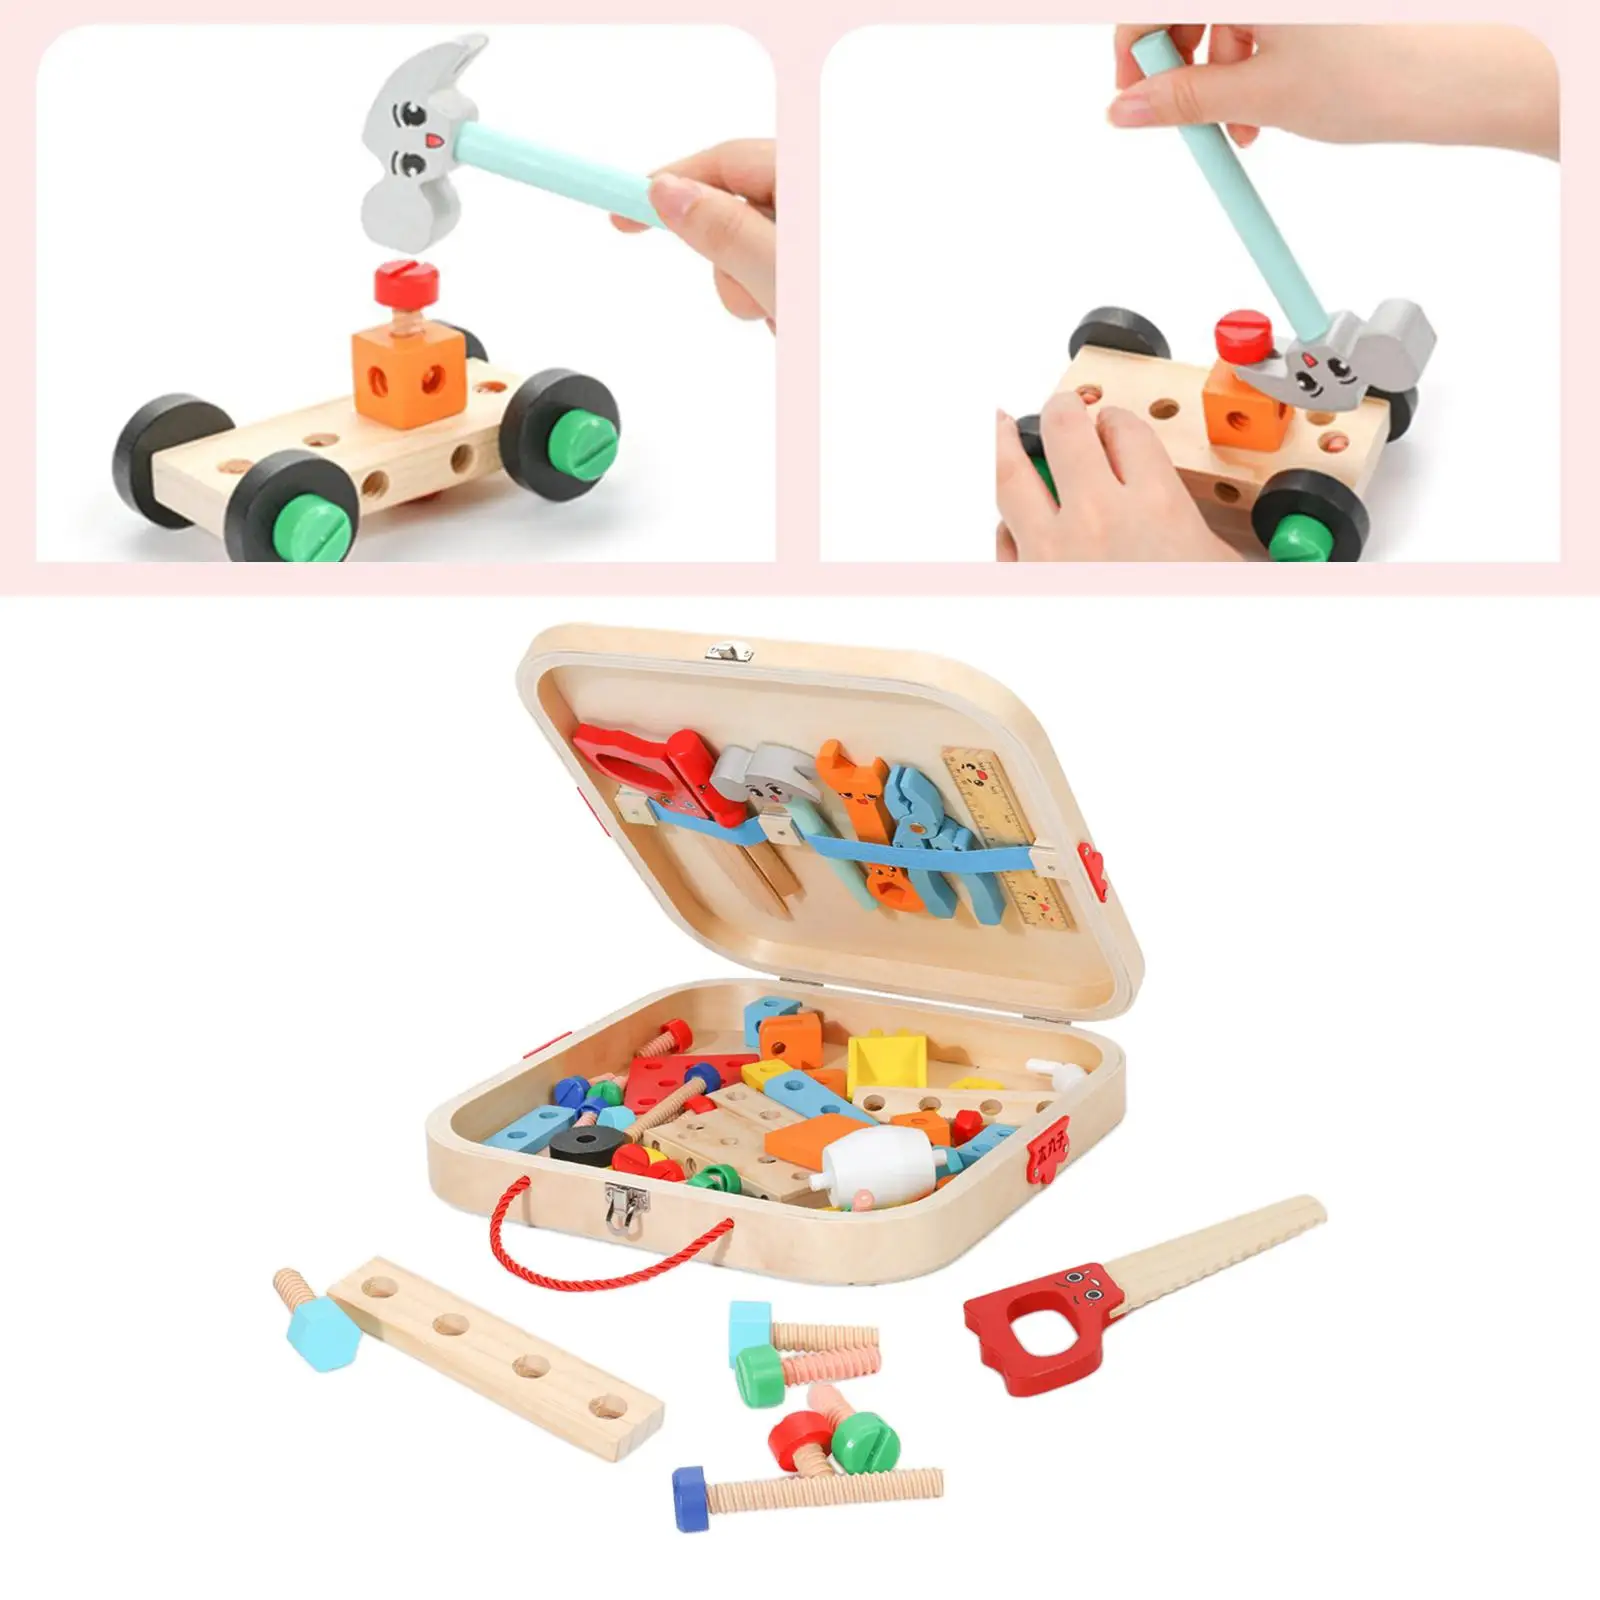 Wooden Kid Tool Set for Toddlers Smooth Fine Motor Skill Wooden Toy Tool Box for DIY Bedroom Birthday Gift Room Toddlers